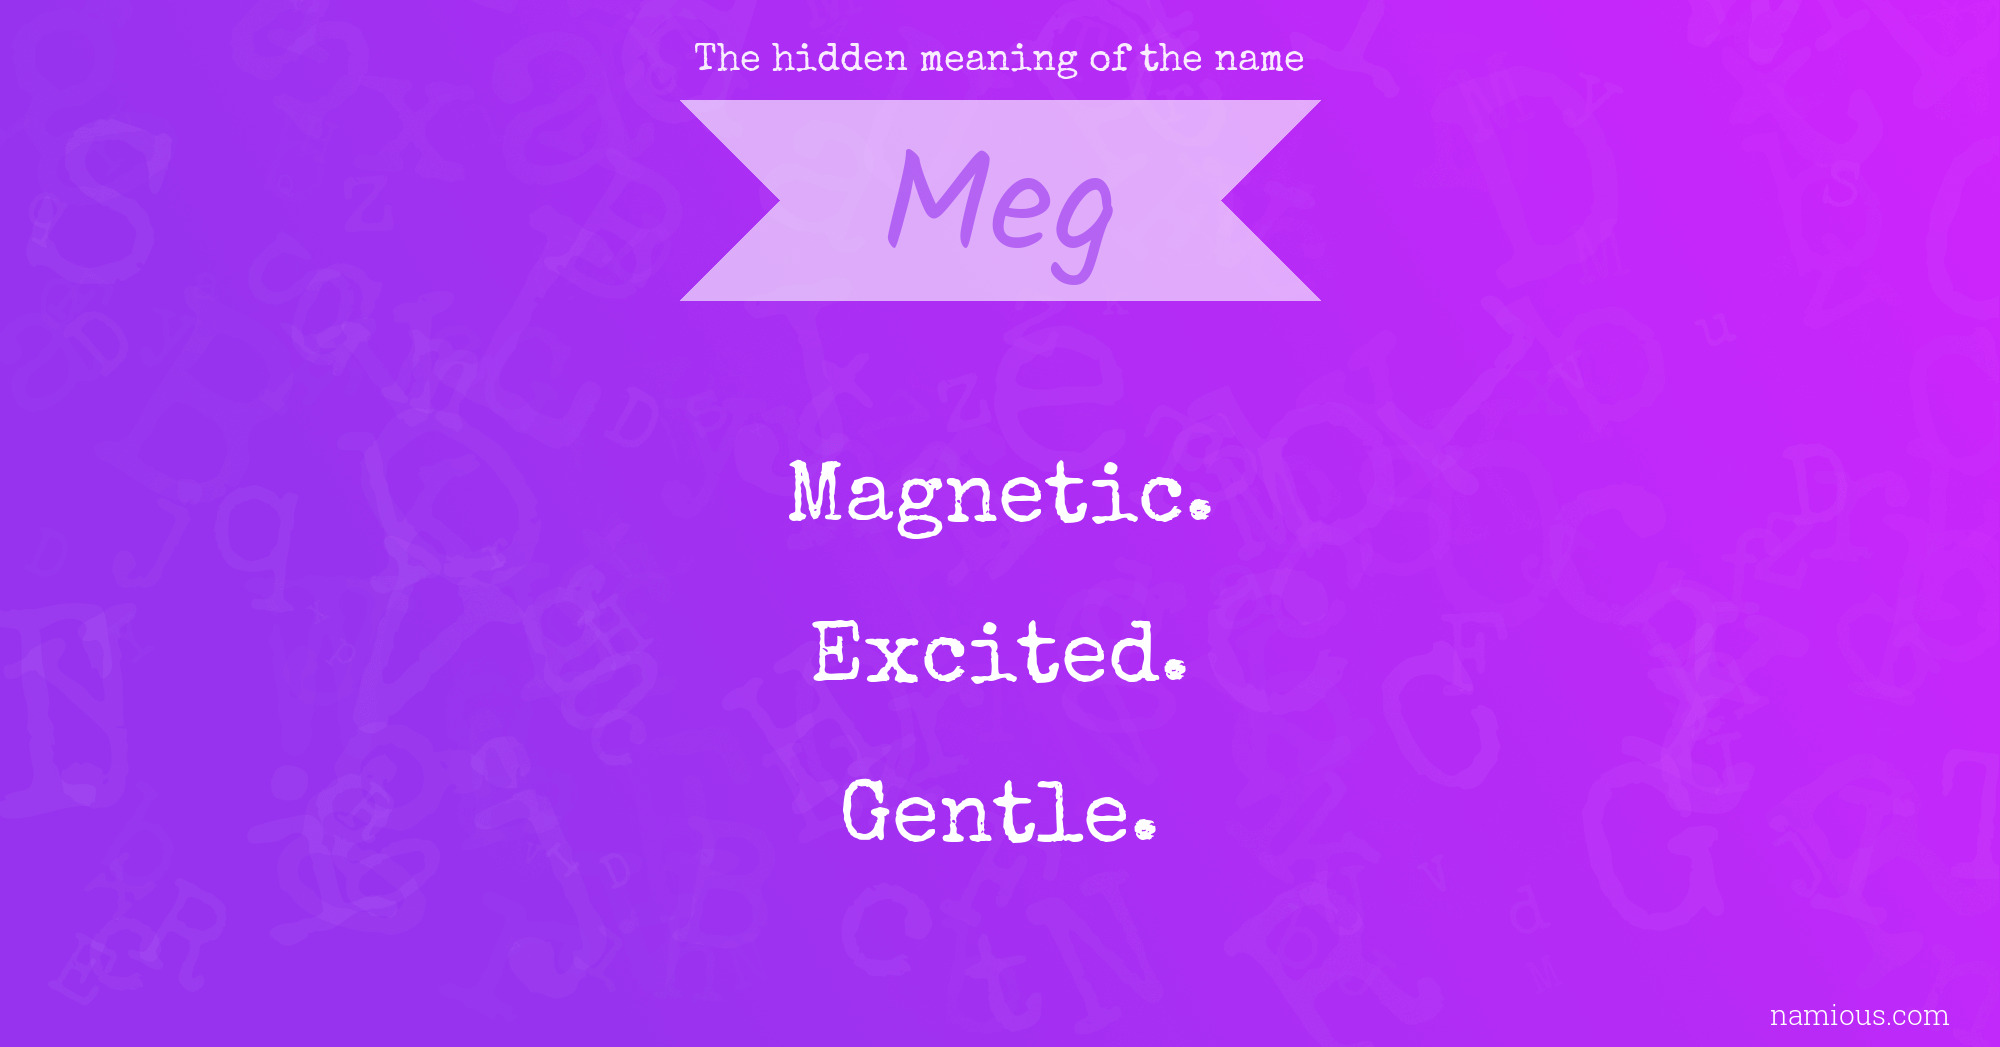 The hidden meaning of the name Meg